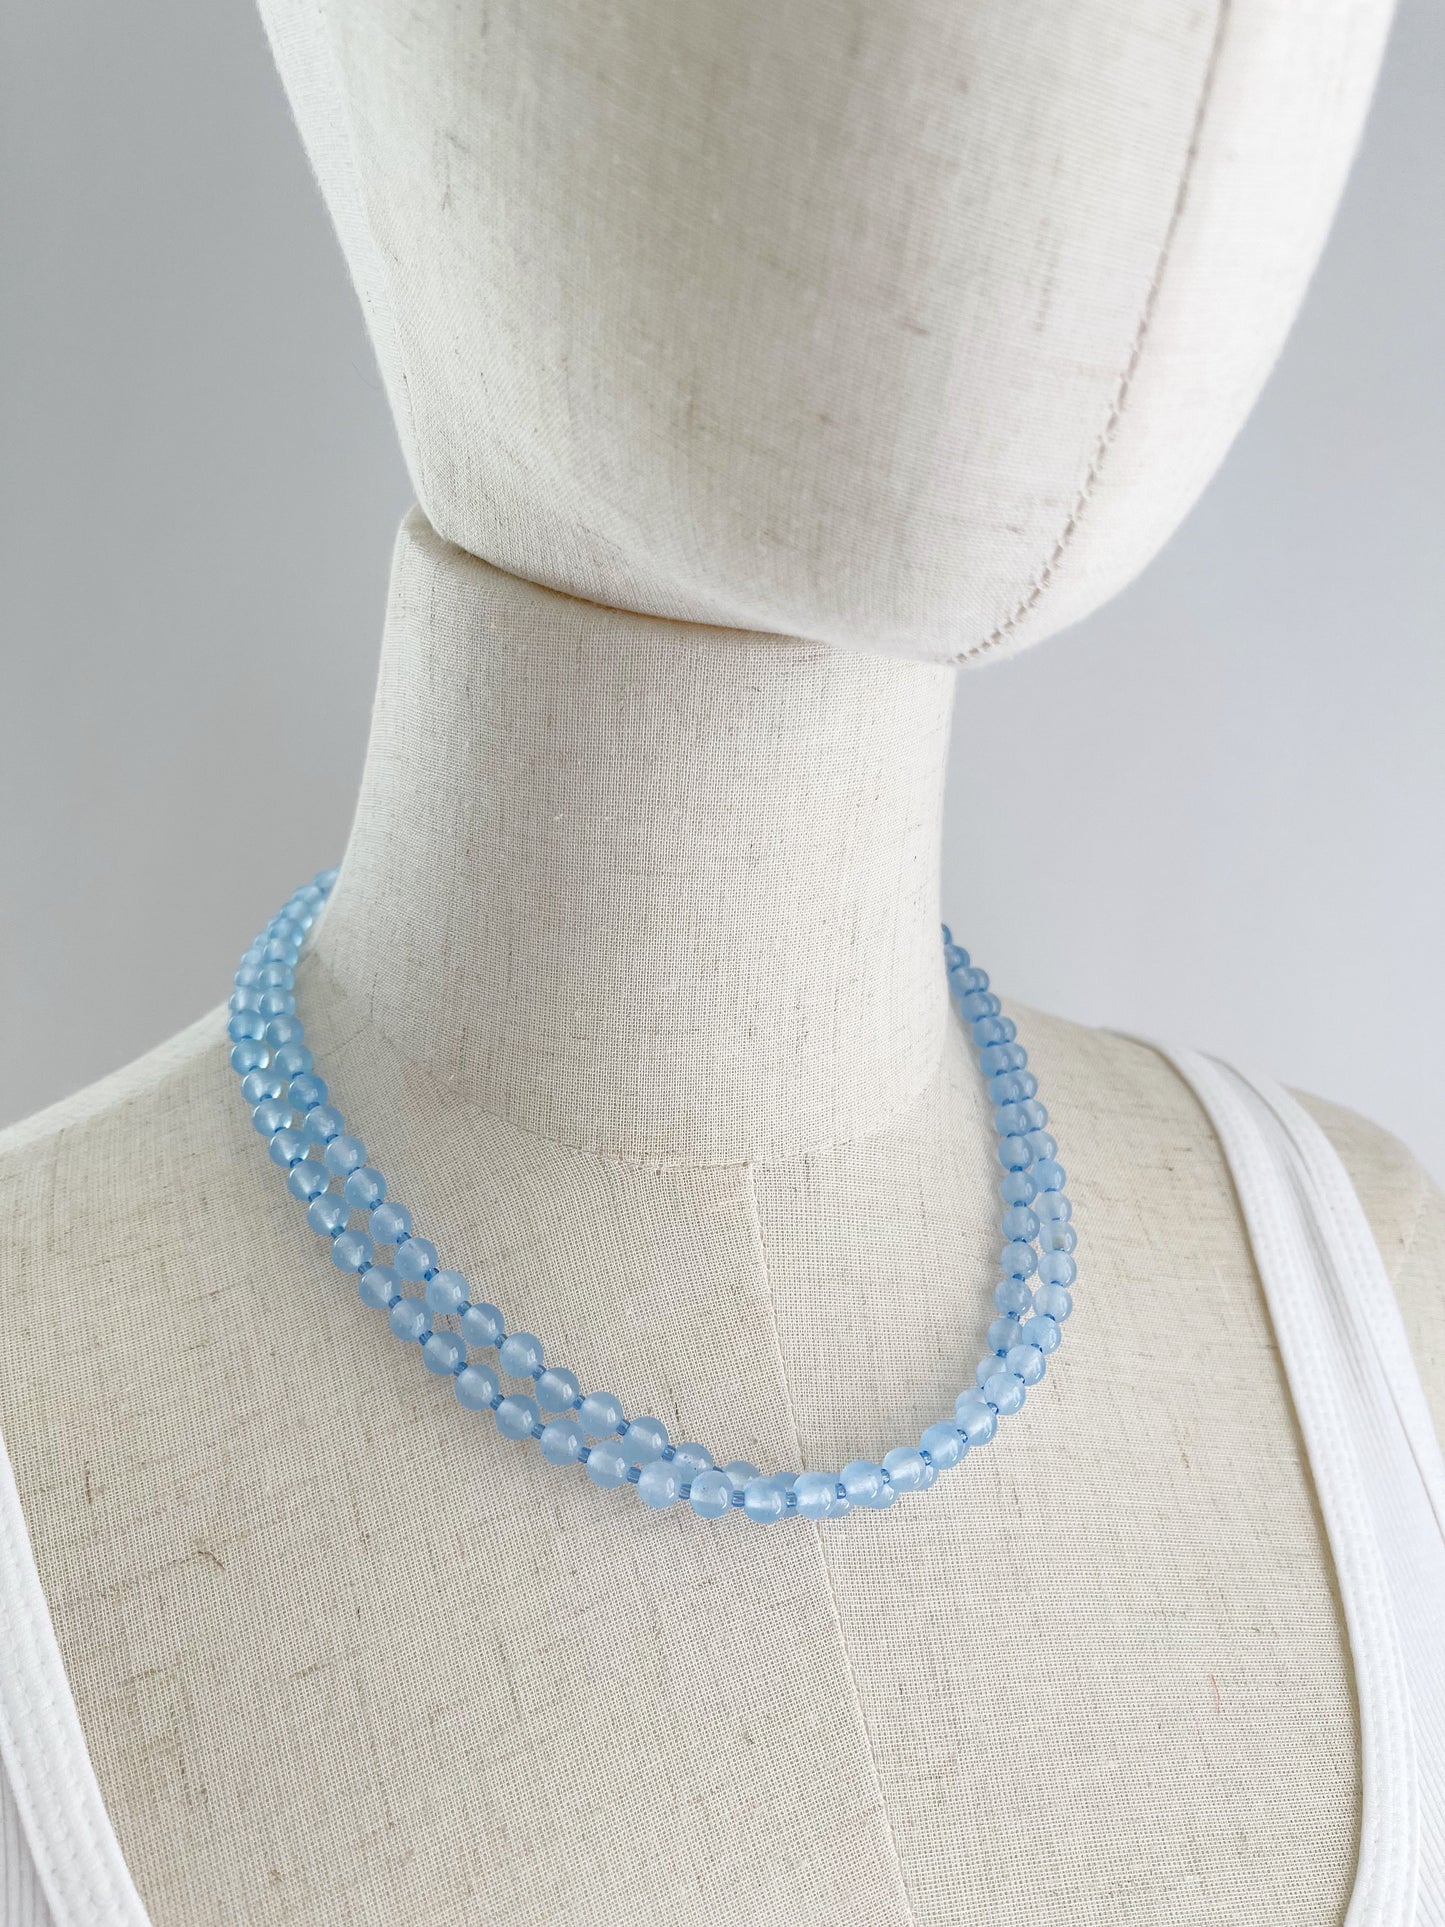 B. 38” Long & double-able necklace of Blue Jade